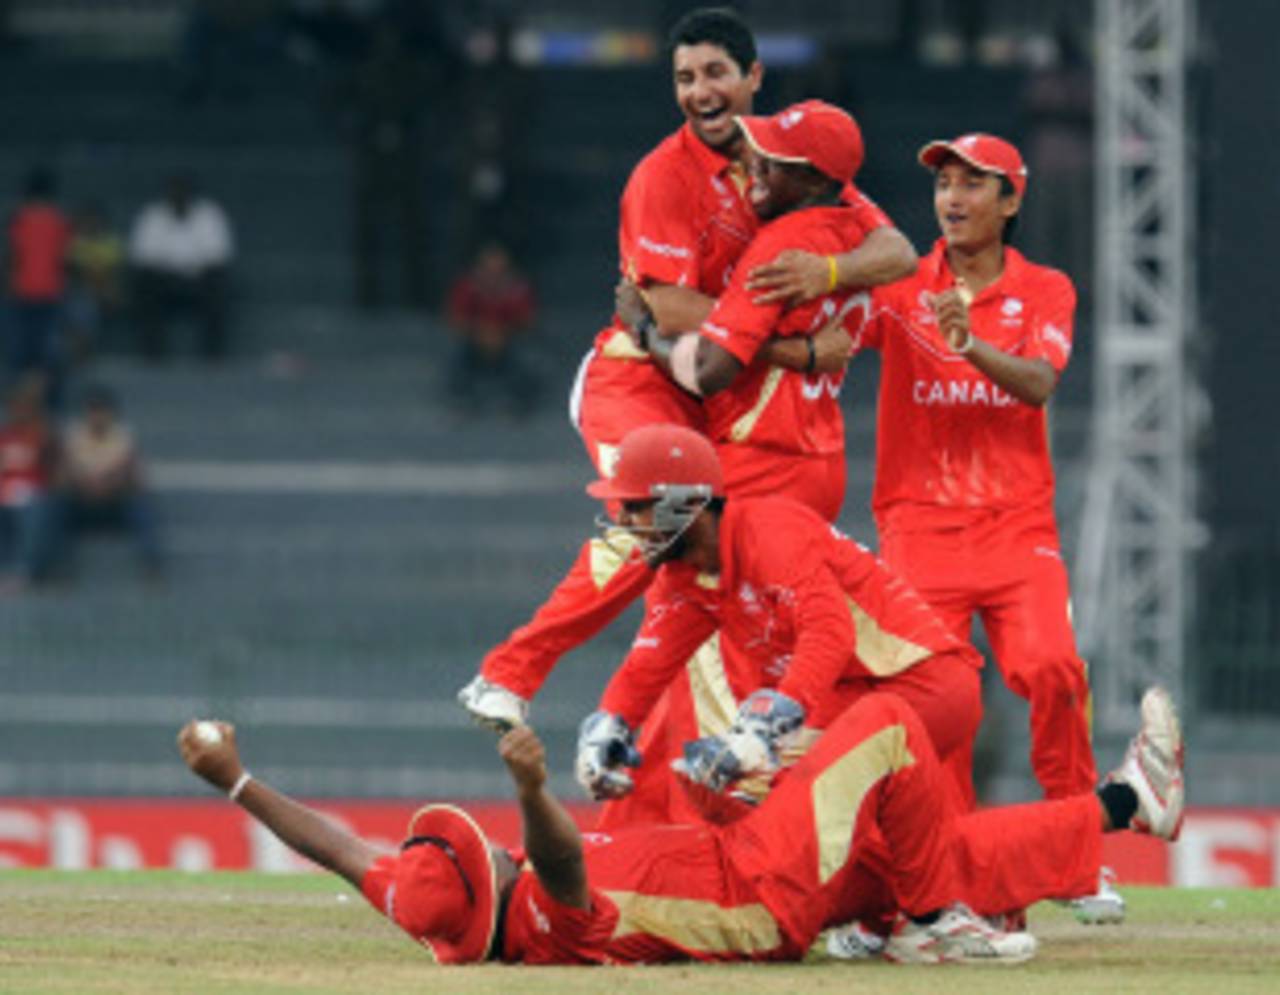 Canada are delighted after the burly Balaji Rao manages to clutch a slip catch between his thighs&nbsp;&nbsp;&bull;&nbsp;&nbsp;AFP